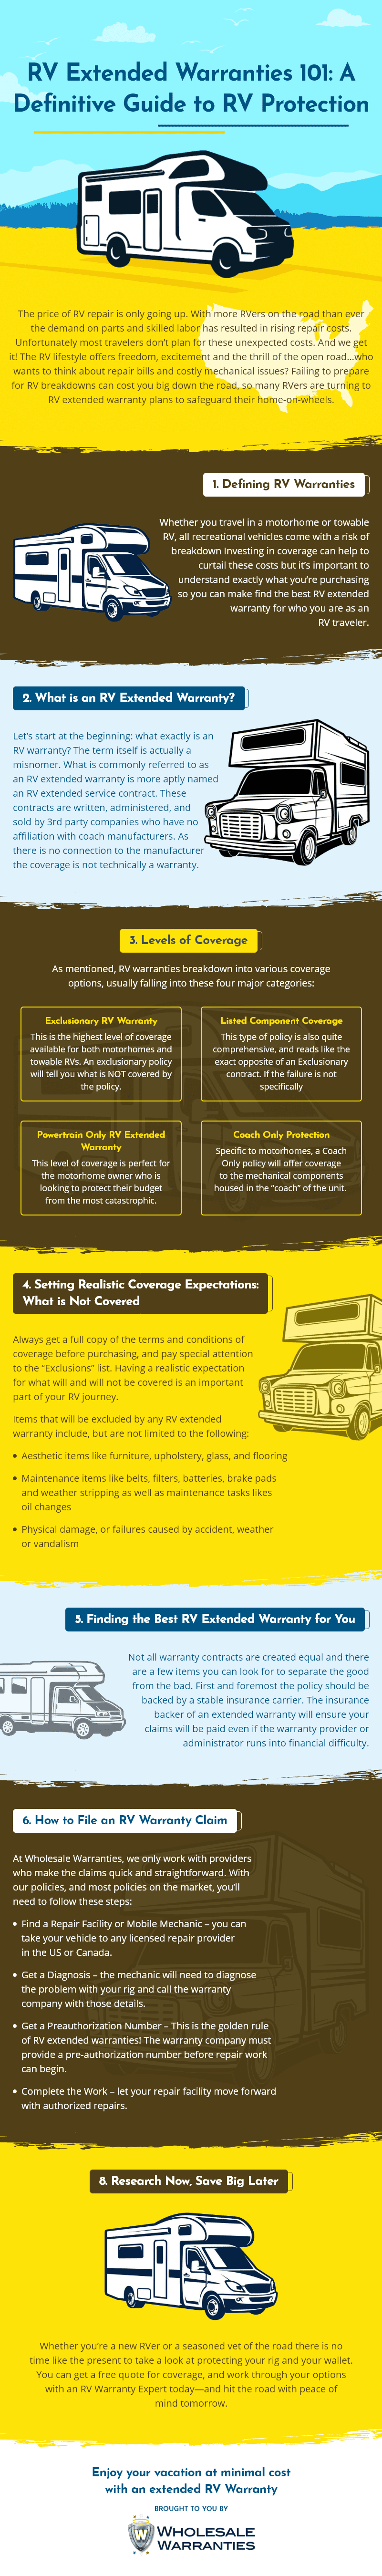 a definitive guide to rv extended warranty infographic